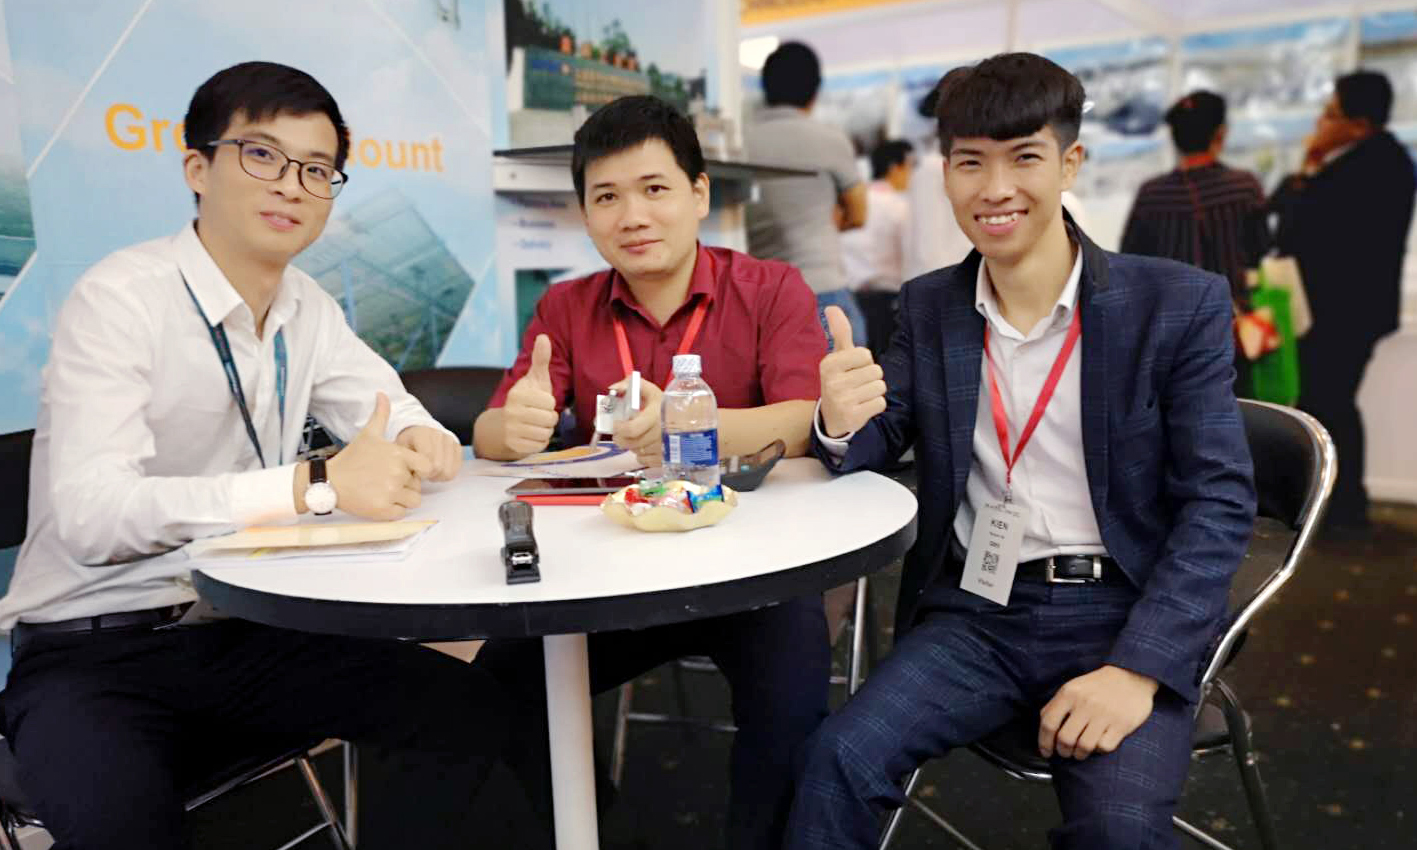 Live Broadcast From CHIKO 2019 Vietnam International Solar Energy Exhibition and the 16th Korea Green Energy Expo.